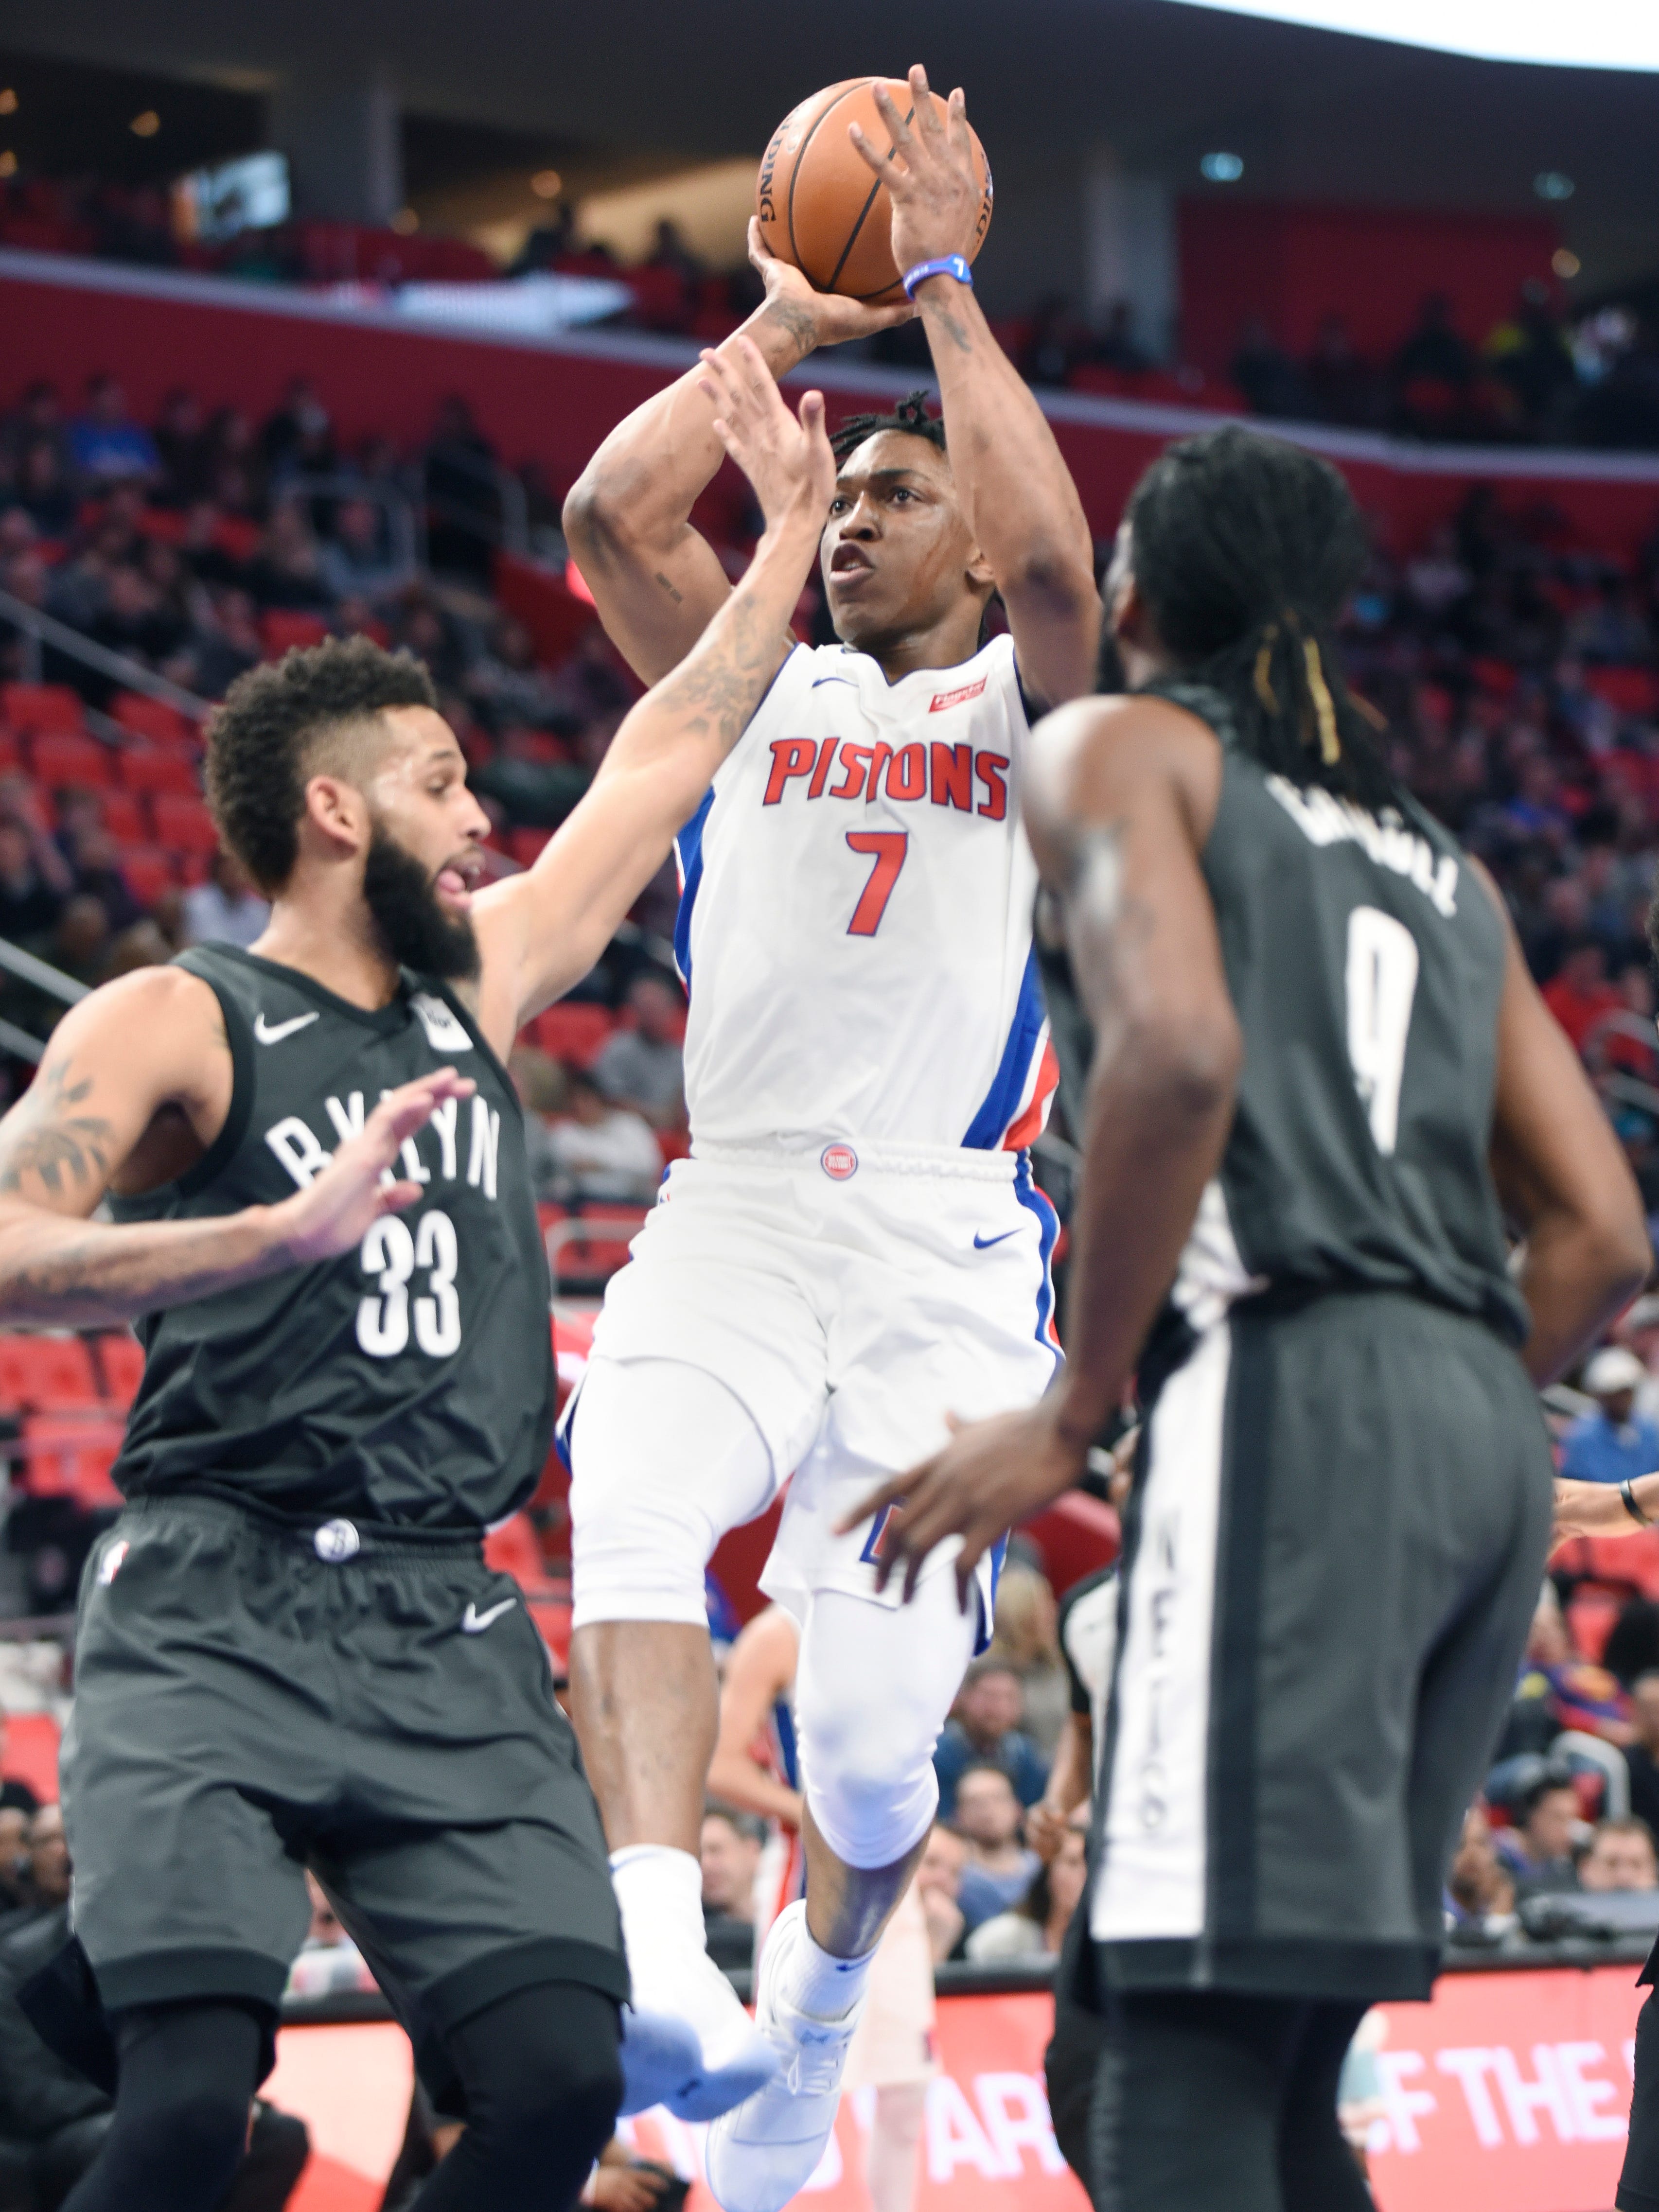 Pistons' Stanley Johnson scores over the Nets' Allen Crabbe in the fourth quarter. Johnson had 19 points and two rebounds.